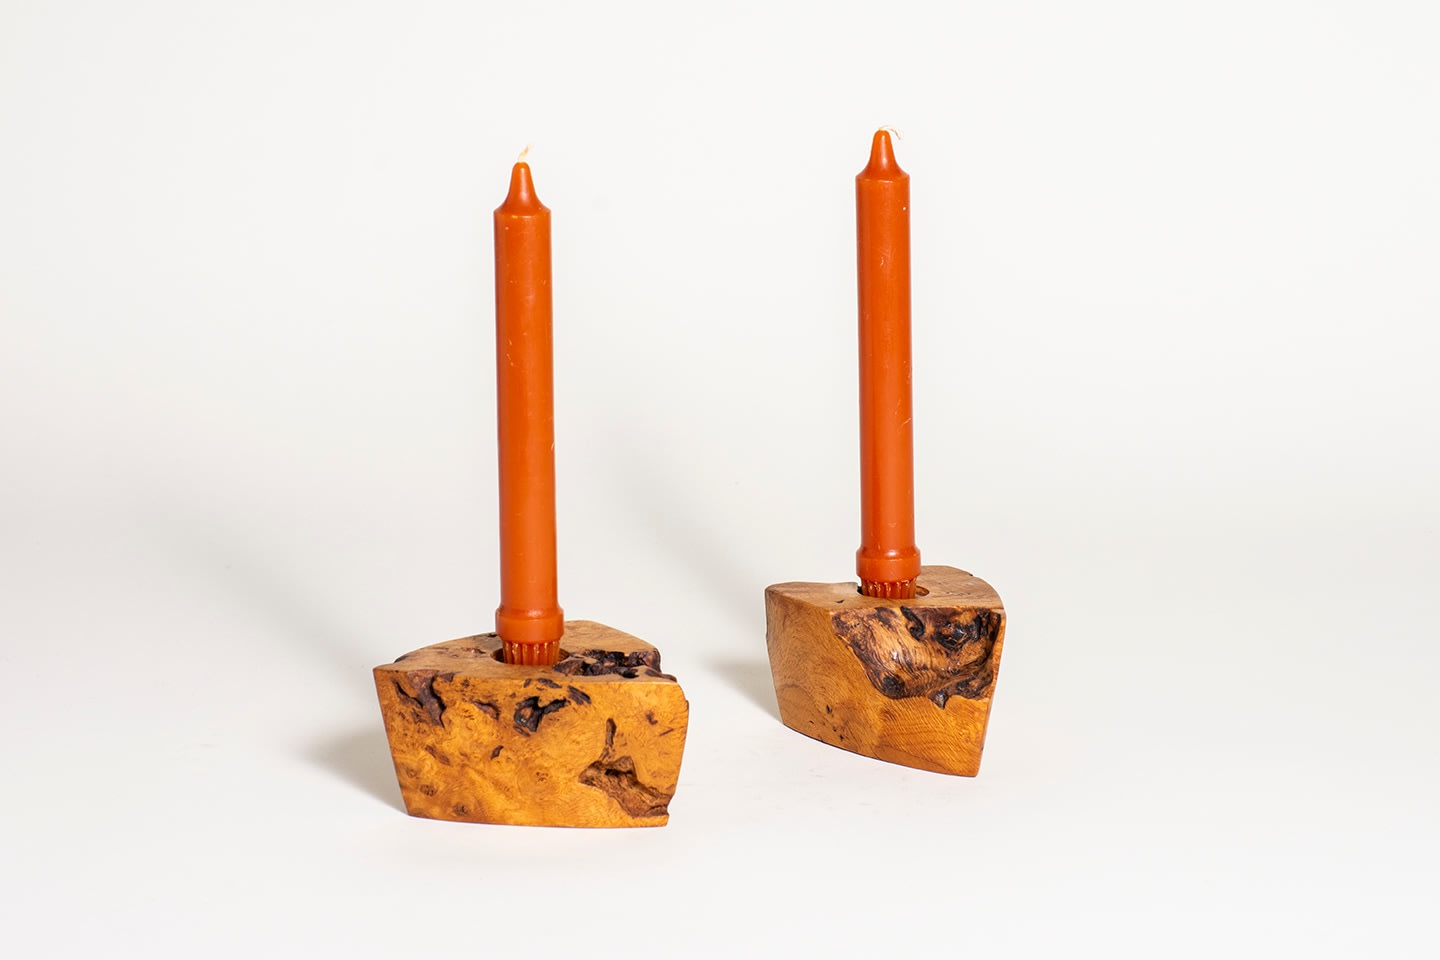 a pair of candlesticks formed by myrtle wood burl, each semi triangular in form, with highly figured grain, holding orange candles